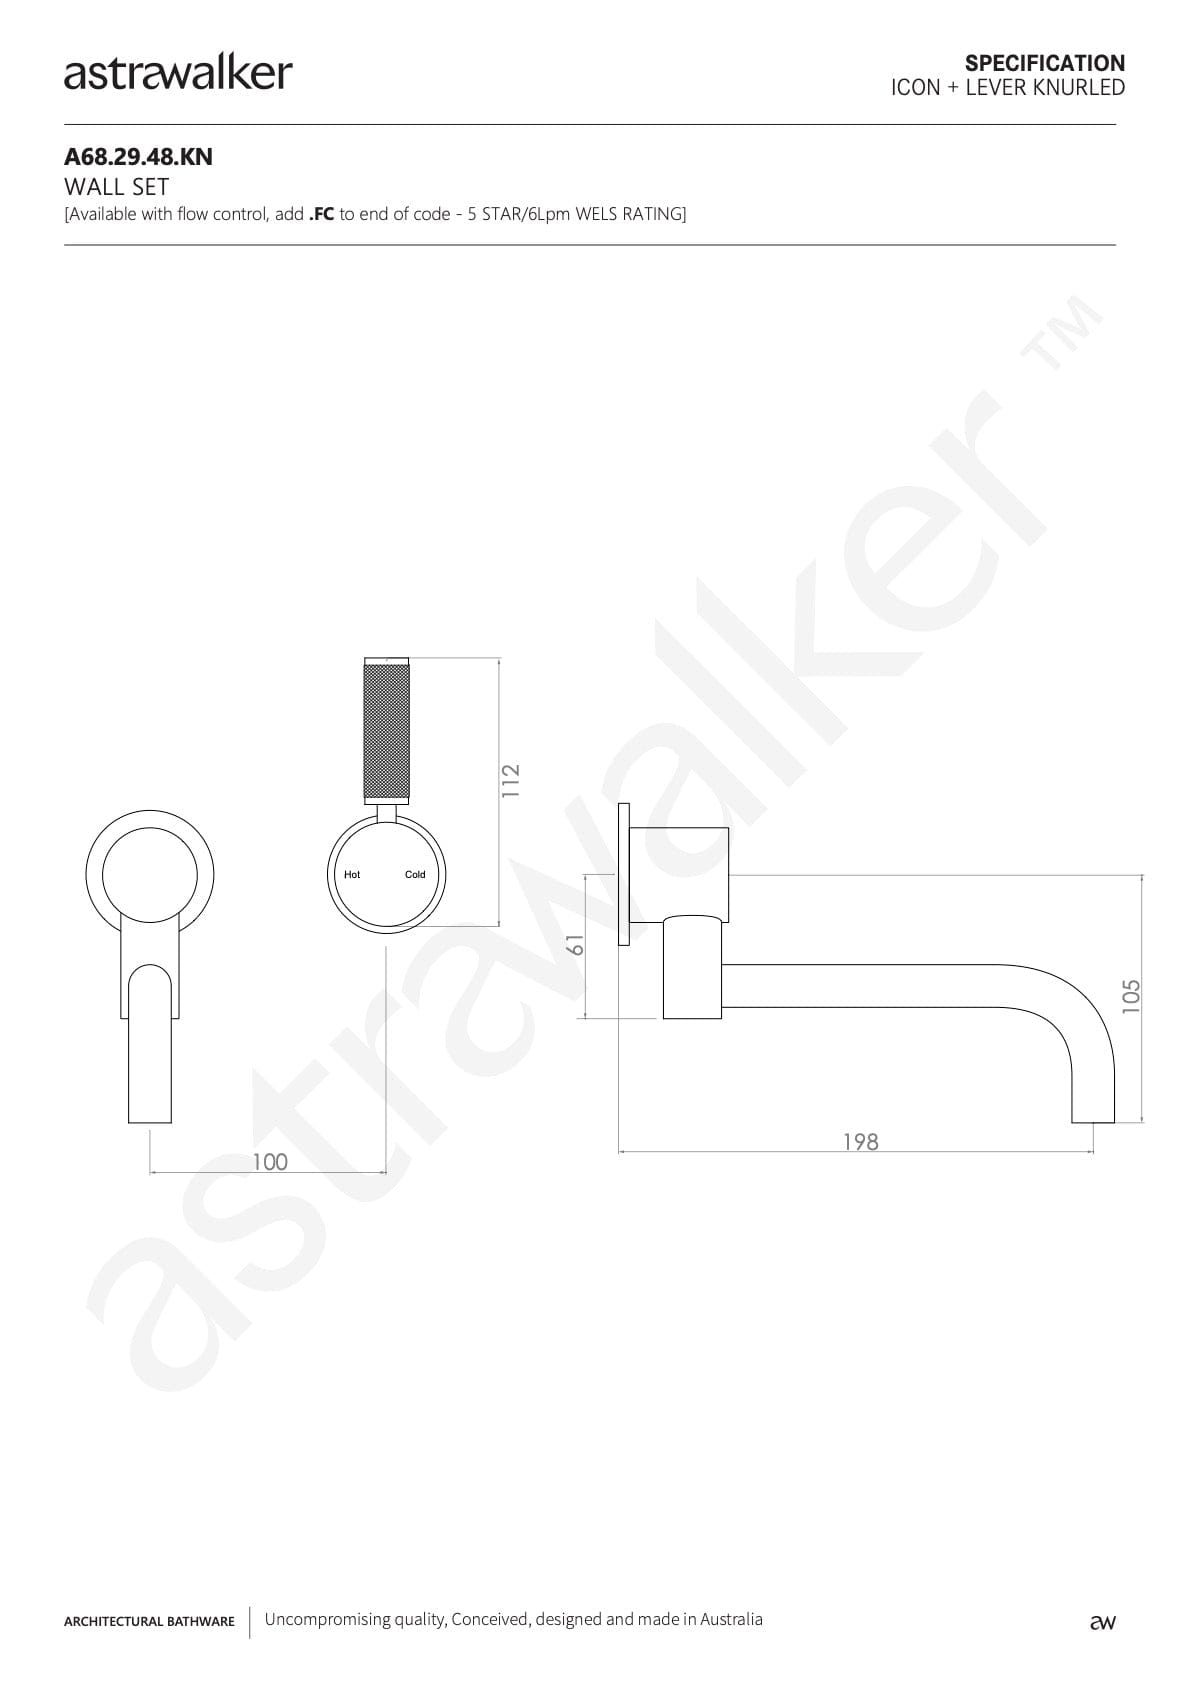 The Kitchen Hub Basin Taps Astra Walker Knurled Icon + Lever Wall Mixer Set with 200mm Underslung Swivel Spout